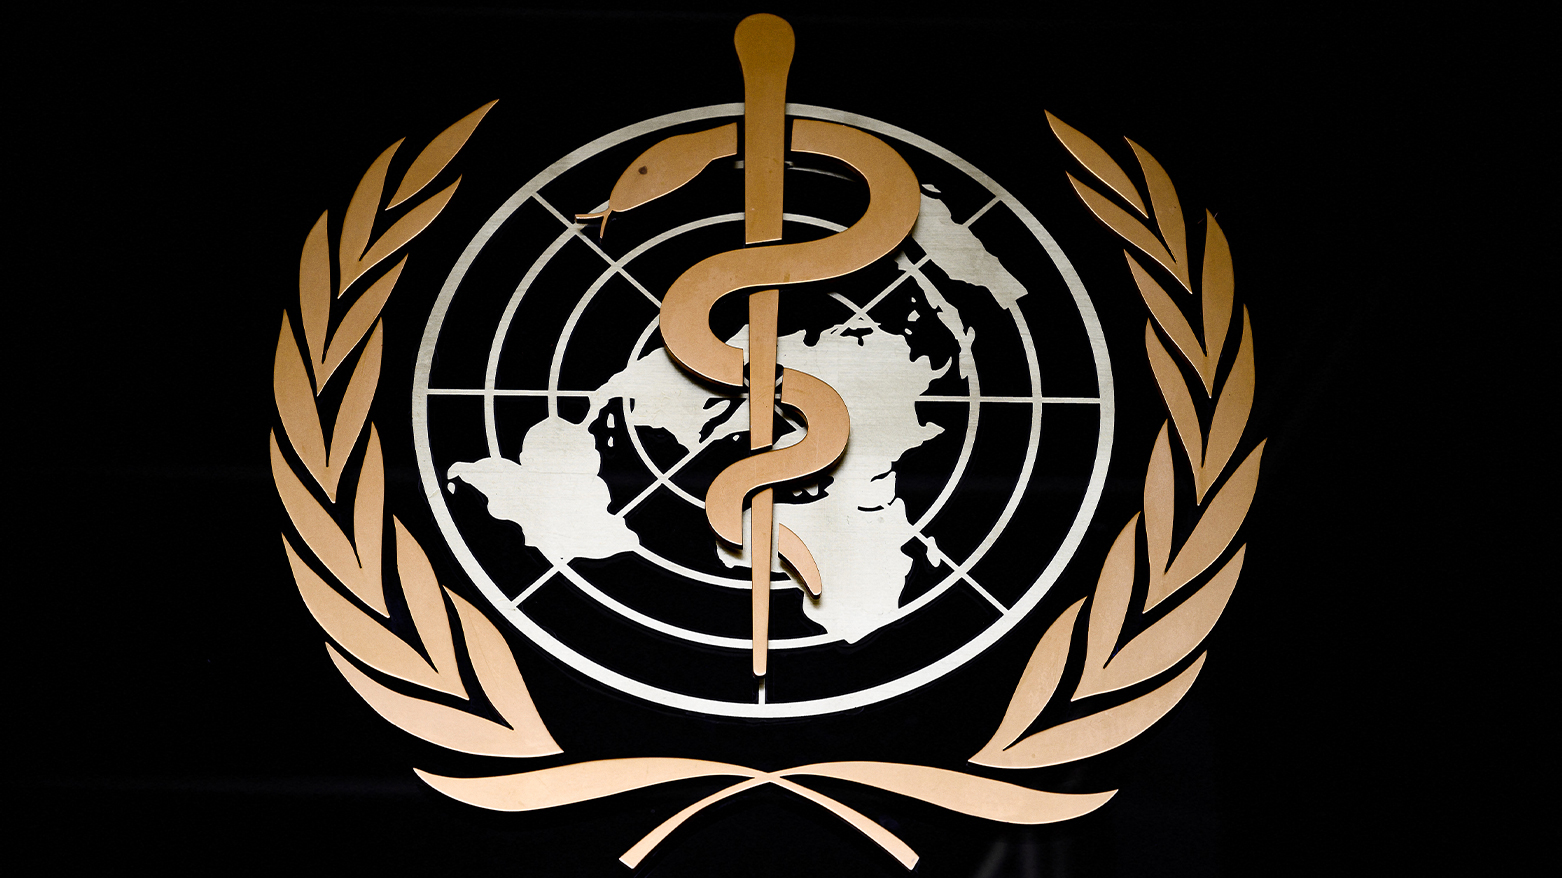 A picture taken on March 9, 2020 shows the logo of the World Health Organization (WHO). (Photo: AFP)